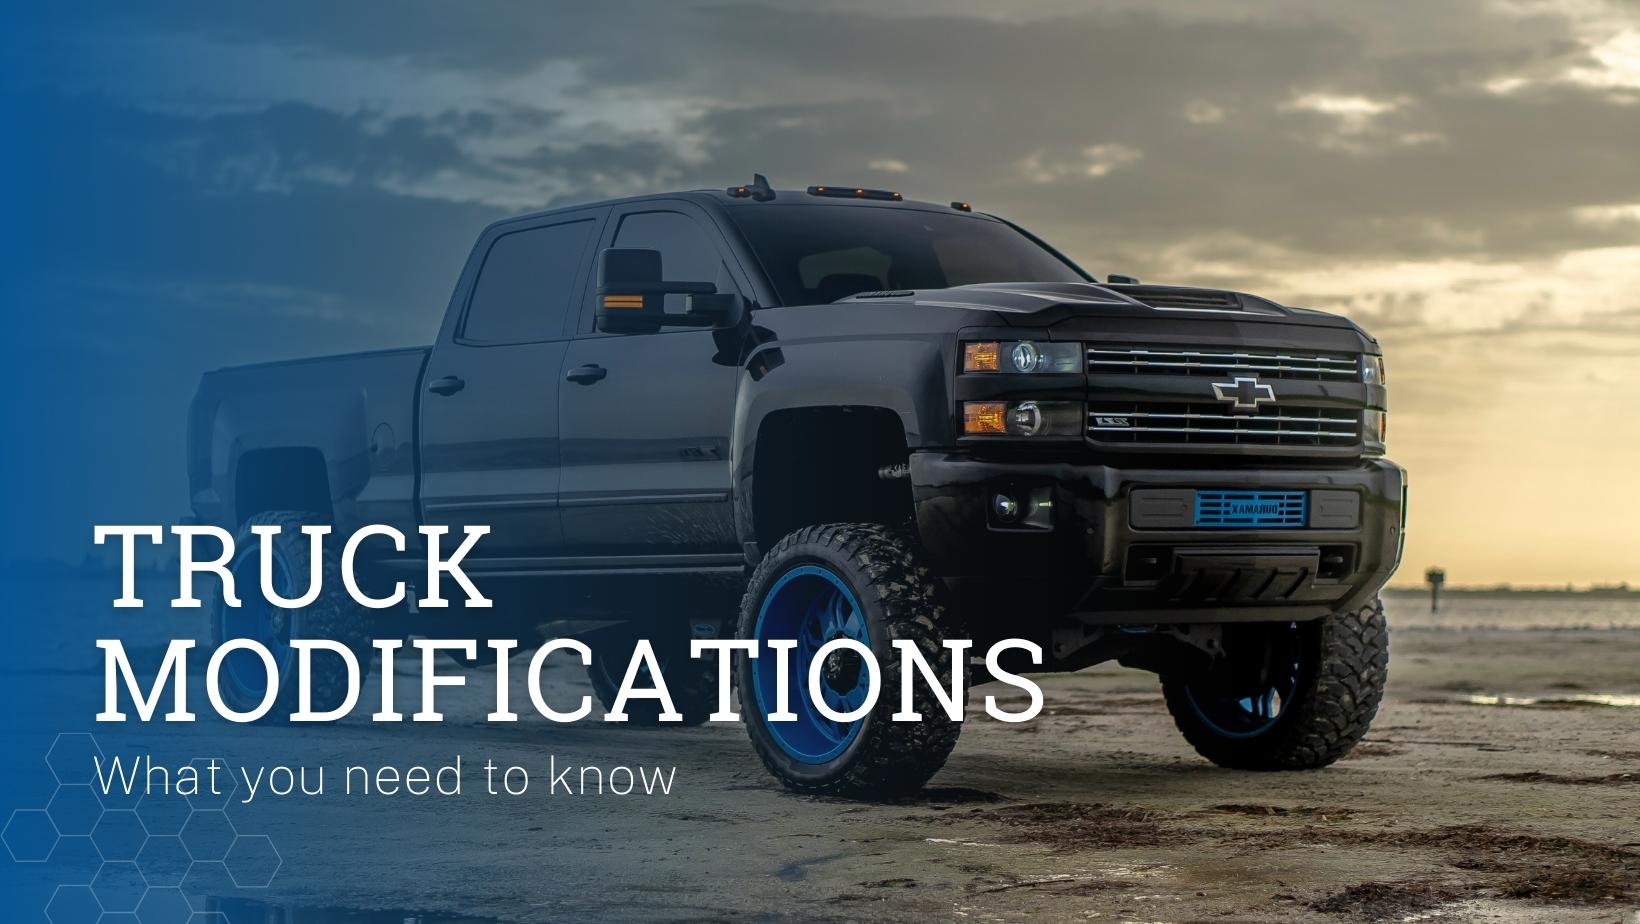 Text that reads "Truck Modifications: What you need to know" over a blue background with a photo of a black ford pickup truck.